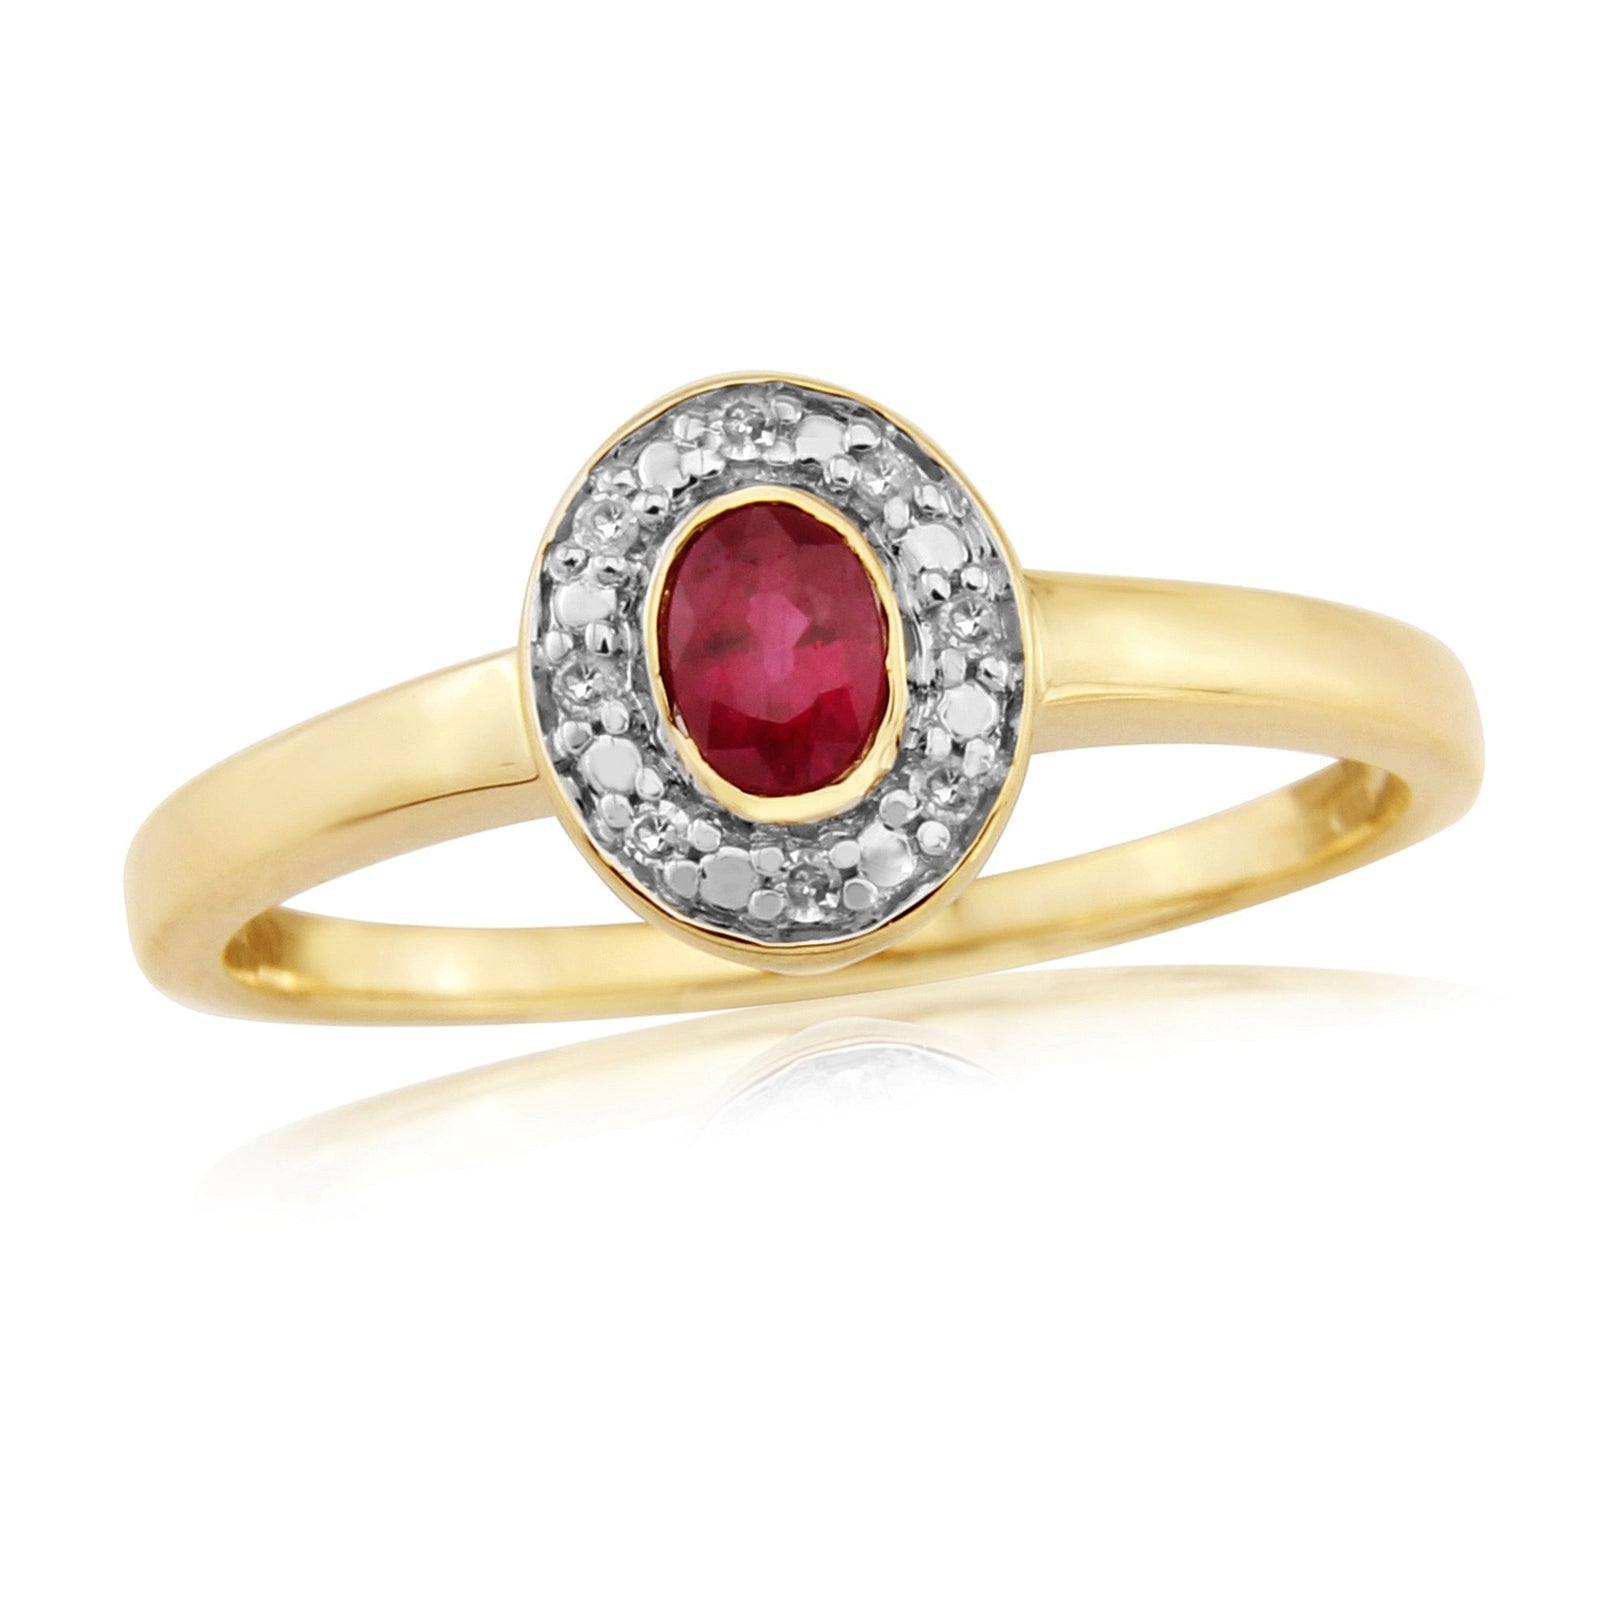 9ct gold 4x3mm oval ruby & diamond cluster ring 0.03ct